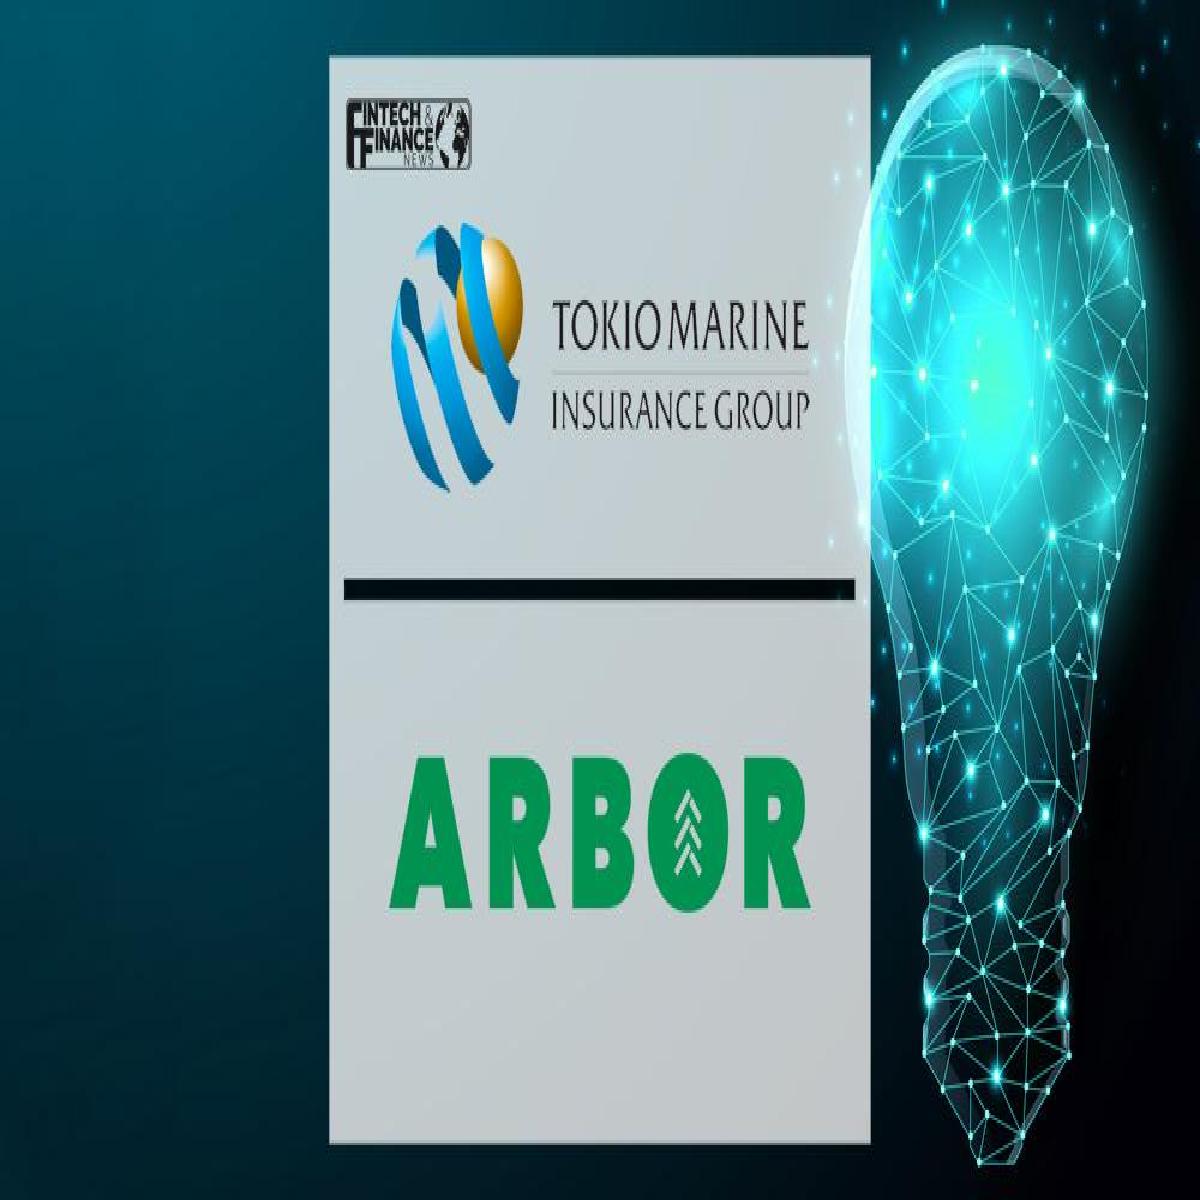 Arbor Ventures Establishes Strategic Partnership With Tokio Marine to Accelerate Innovation in the Insurance Industry